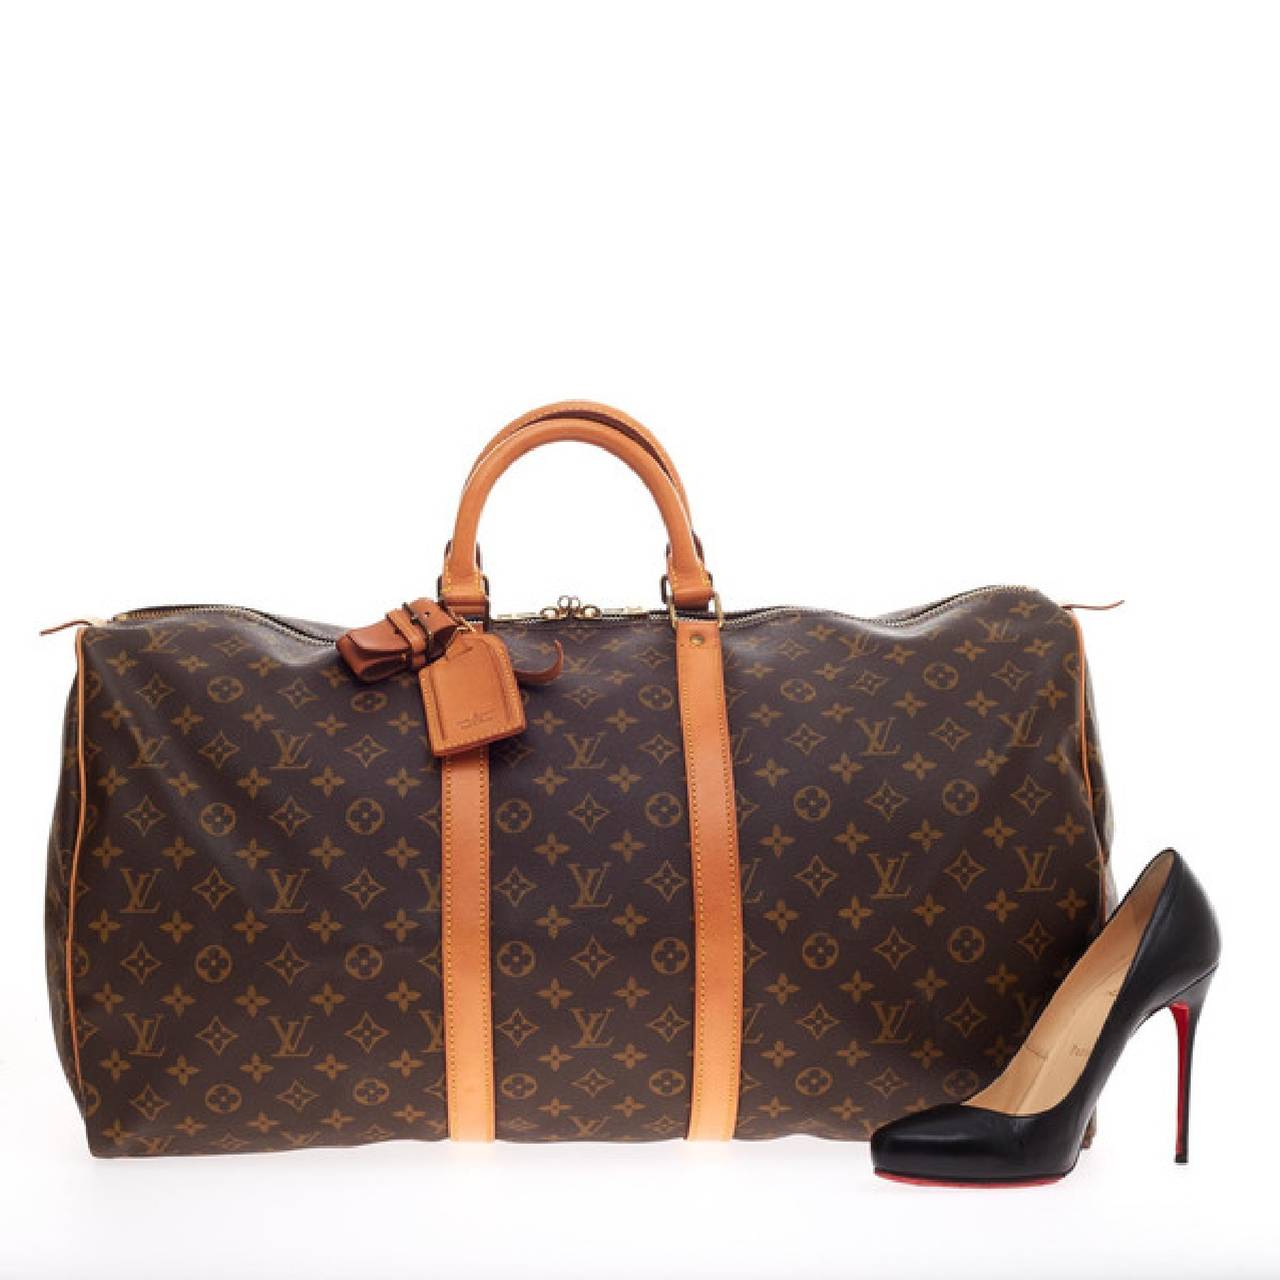 This authentic Louis Vuitton Keepall in size 55 features the brand's timeless travel bags in monogram canvas print. Designed first in 1935, the iconic Keepall is as classic as the Speedy and Noe Bucket. Its roomy interior and lightweight structure